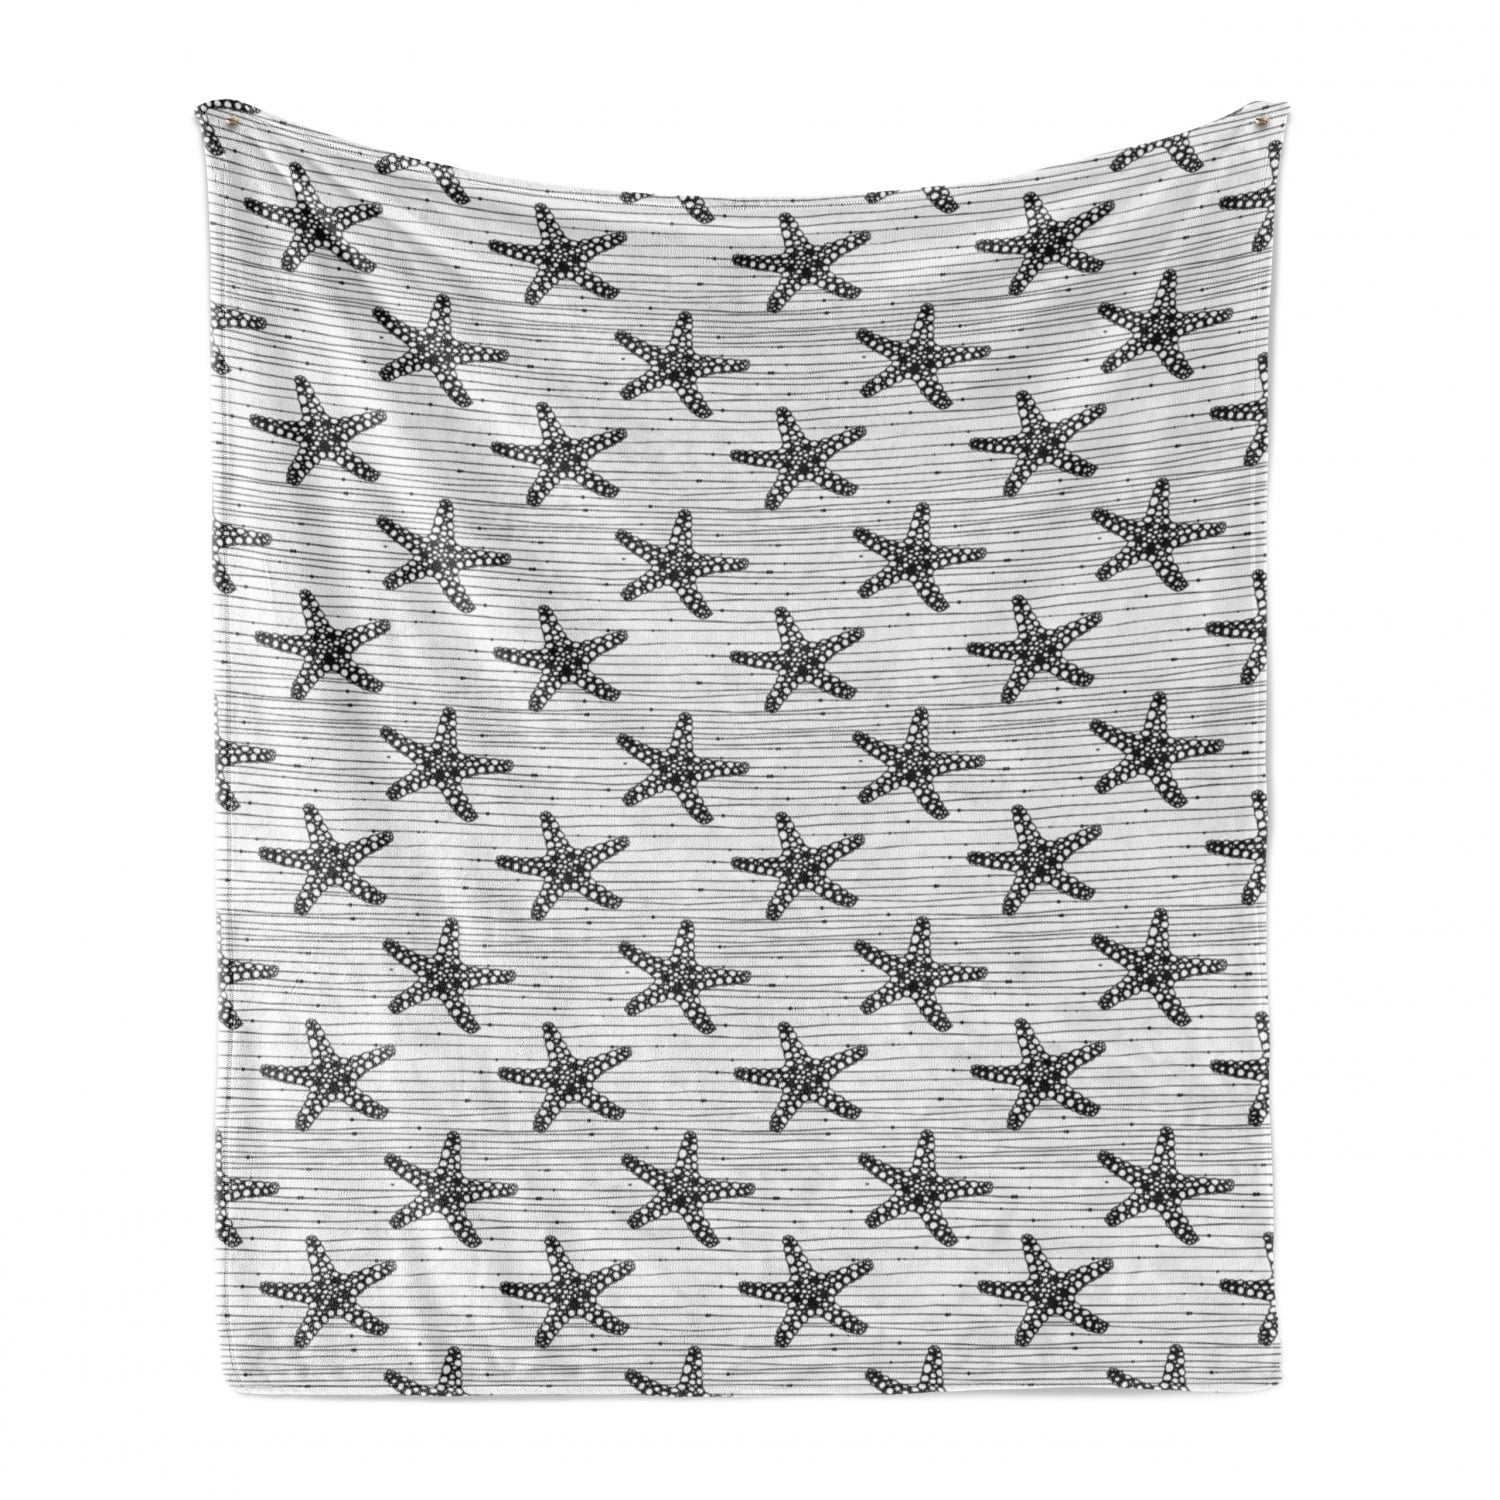 Starfish Pattern on Uneven Stripes with Dots Monochromatic Image Ambesonne Nautical Soft Flannel Fleece Throw Blanket Cozy Plush for Indoor and Outdoor Use 60 x 80 Charcoal Grey and White